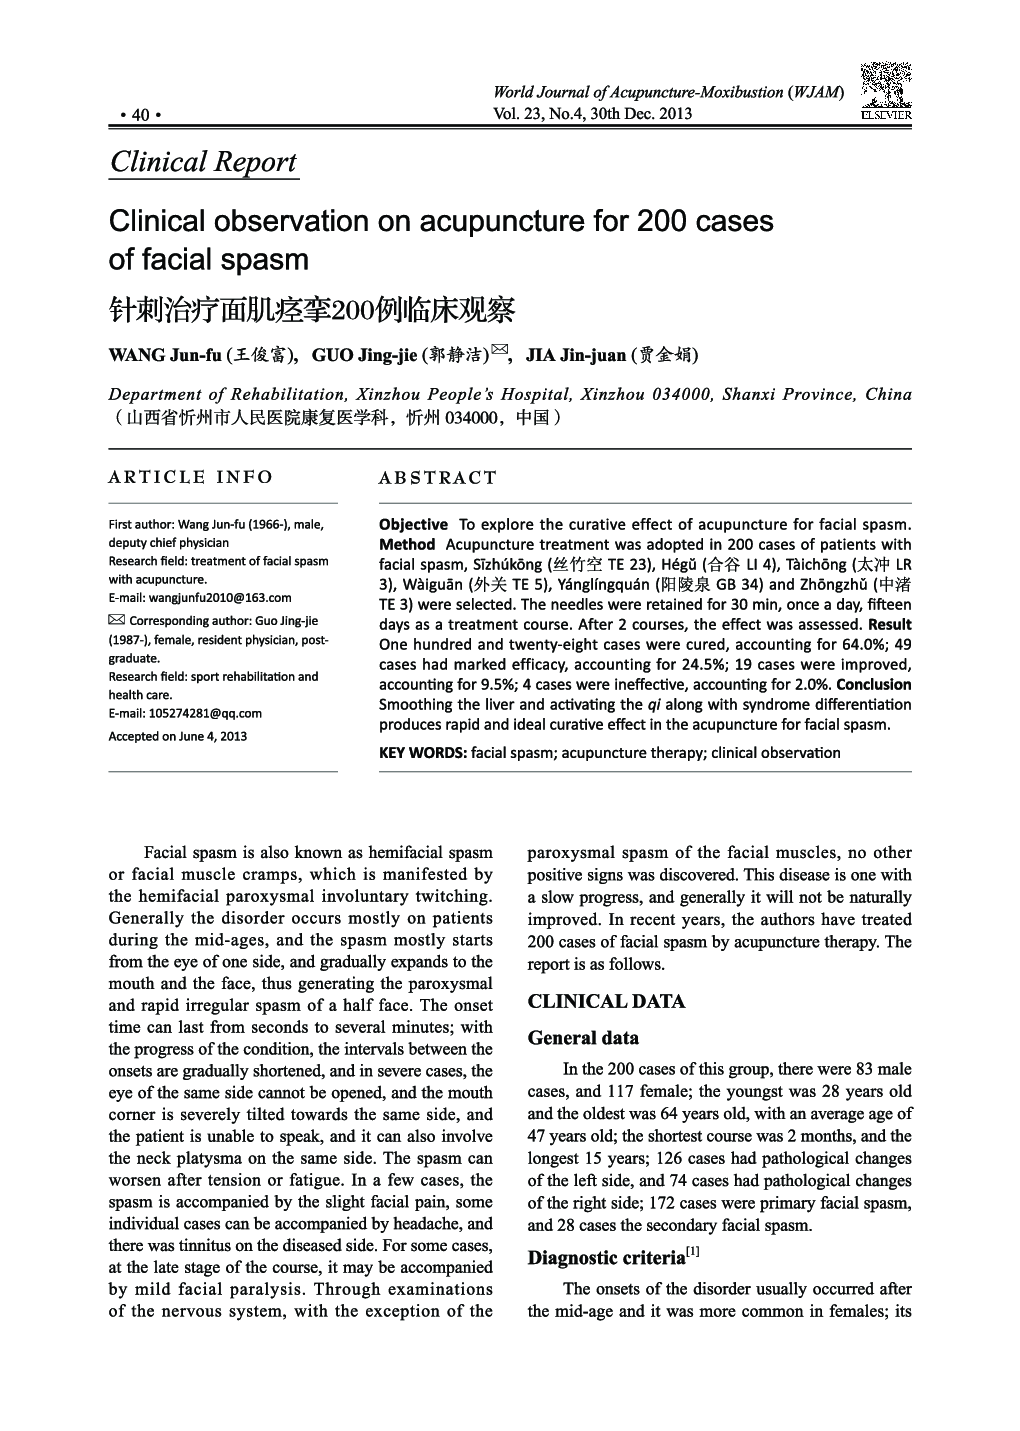 Clinical observation on acupuncture for 200 cases of facial spasm